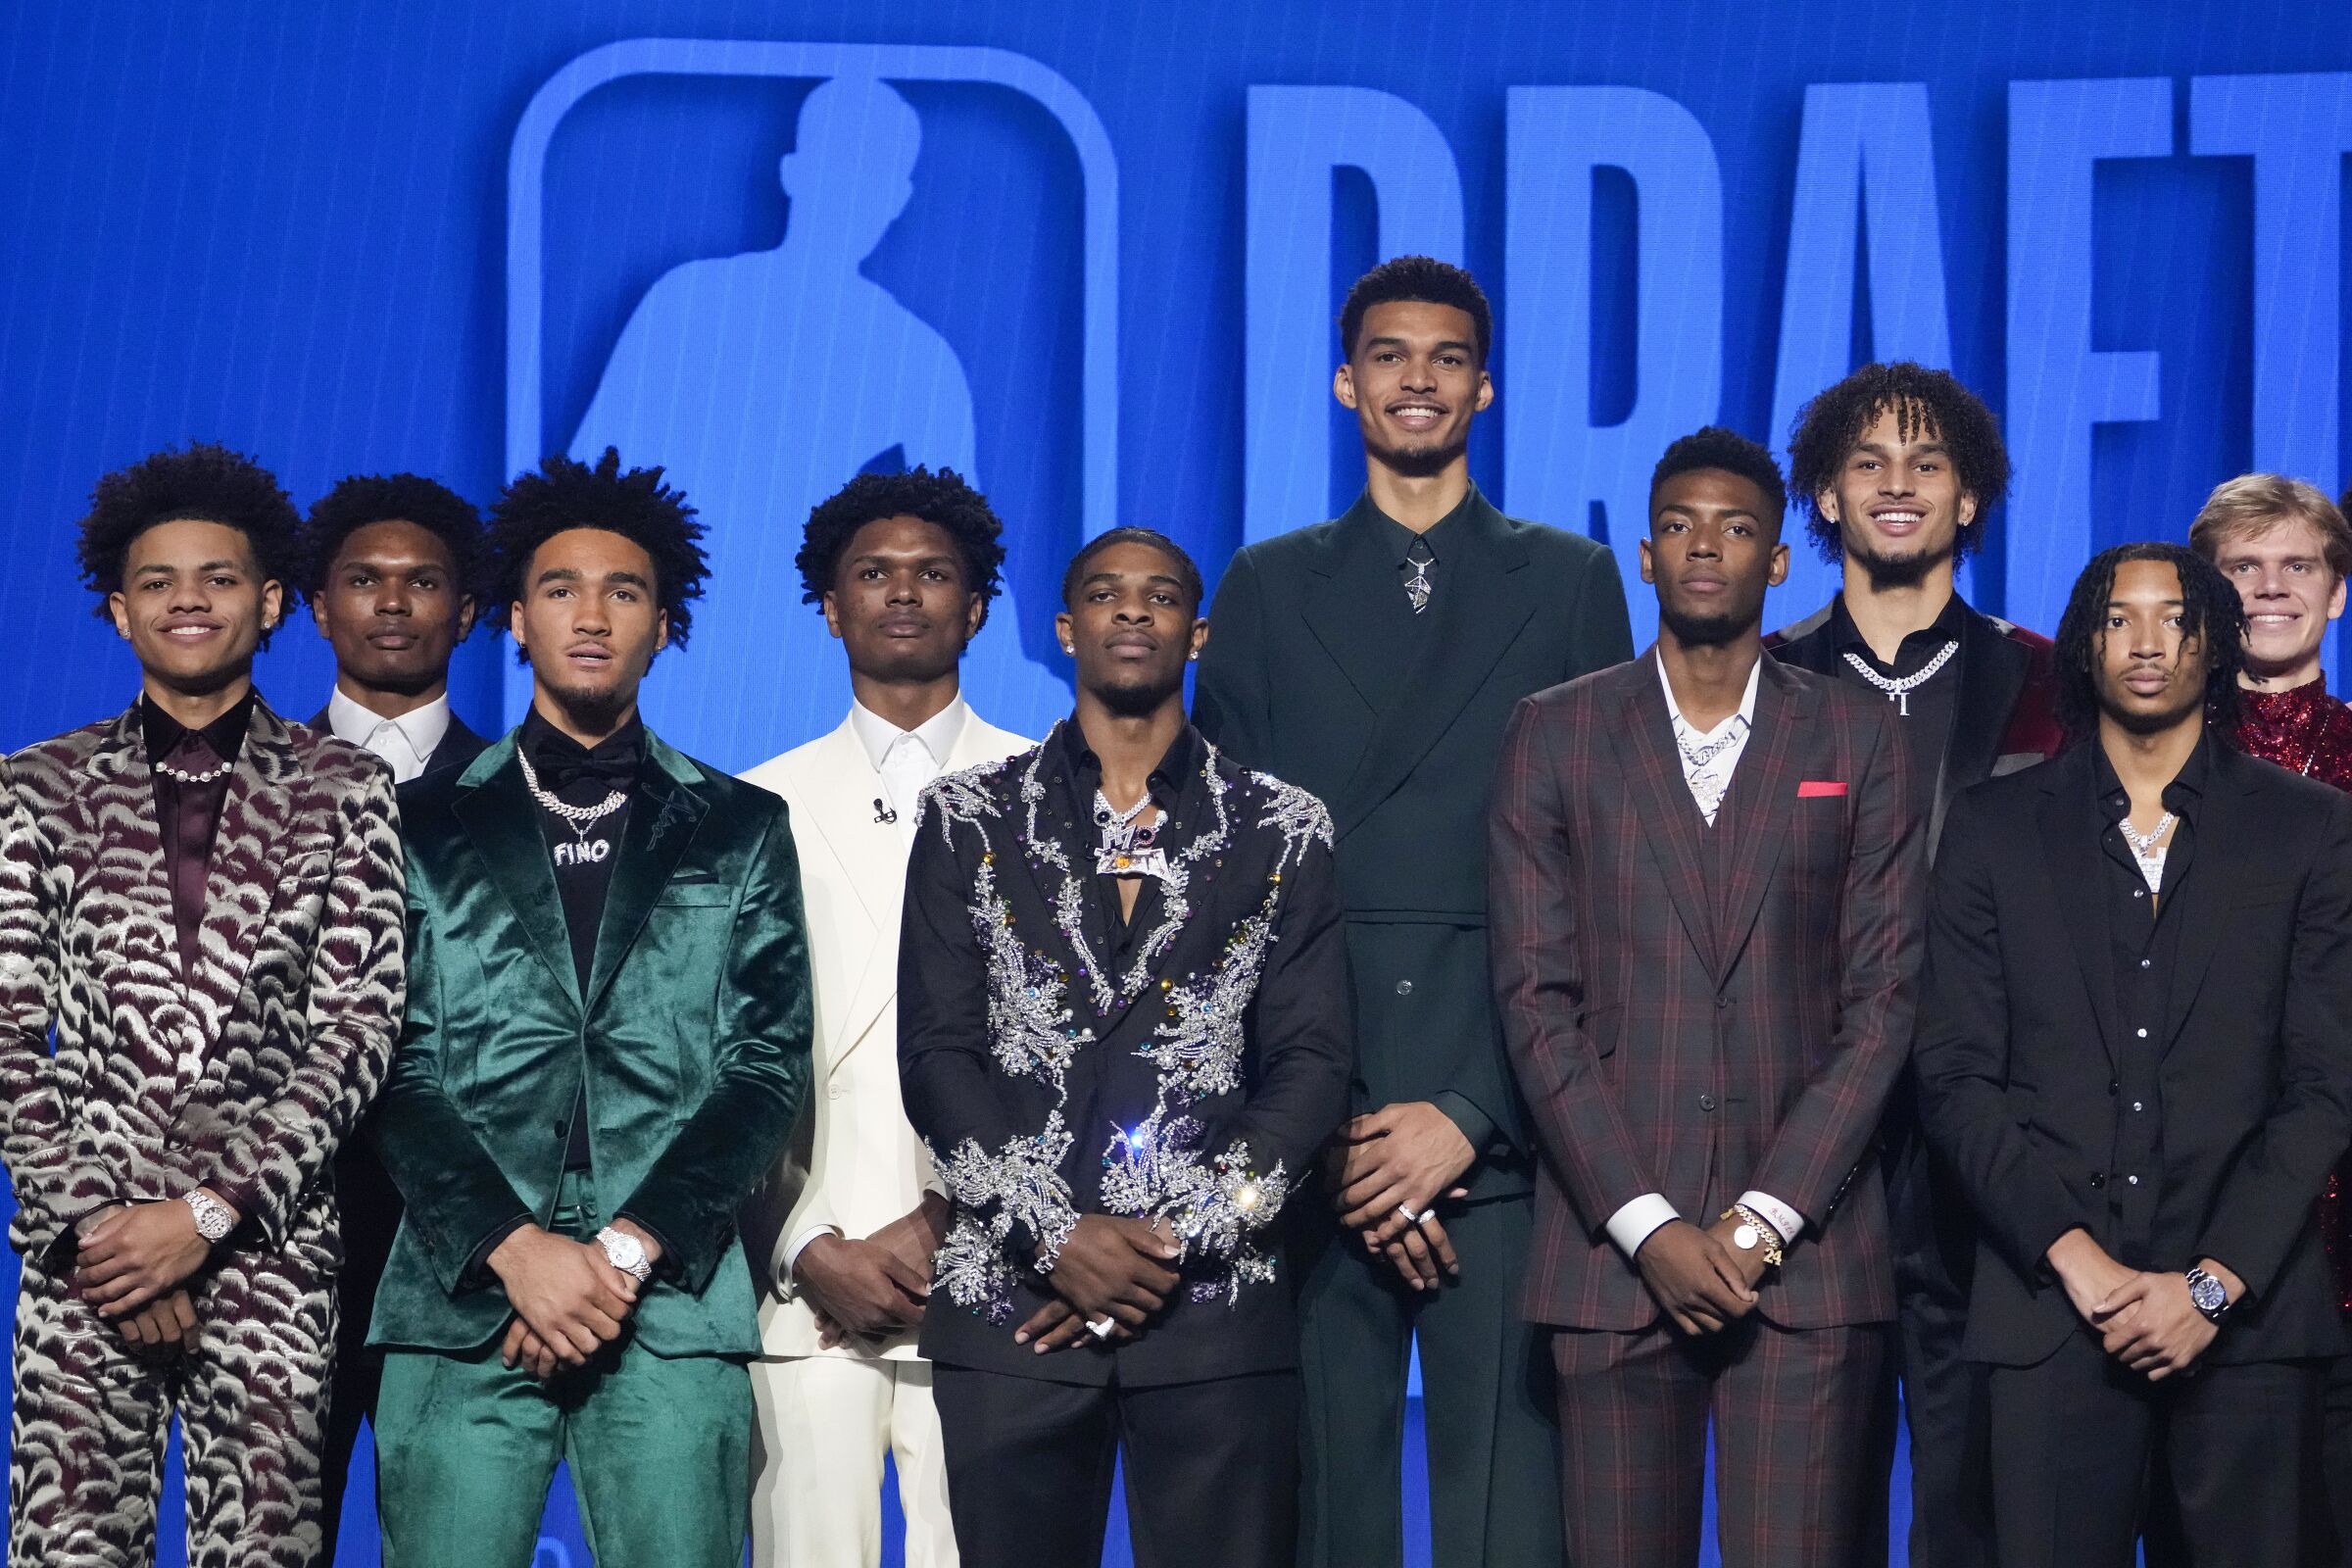 NBA draft fashion statements The good, bedazzled and sockless Los